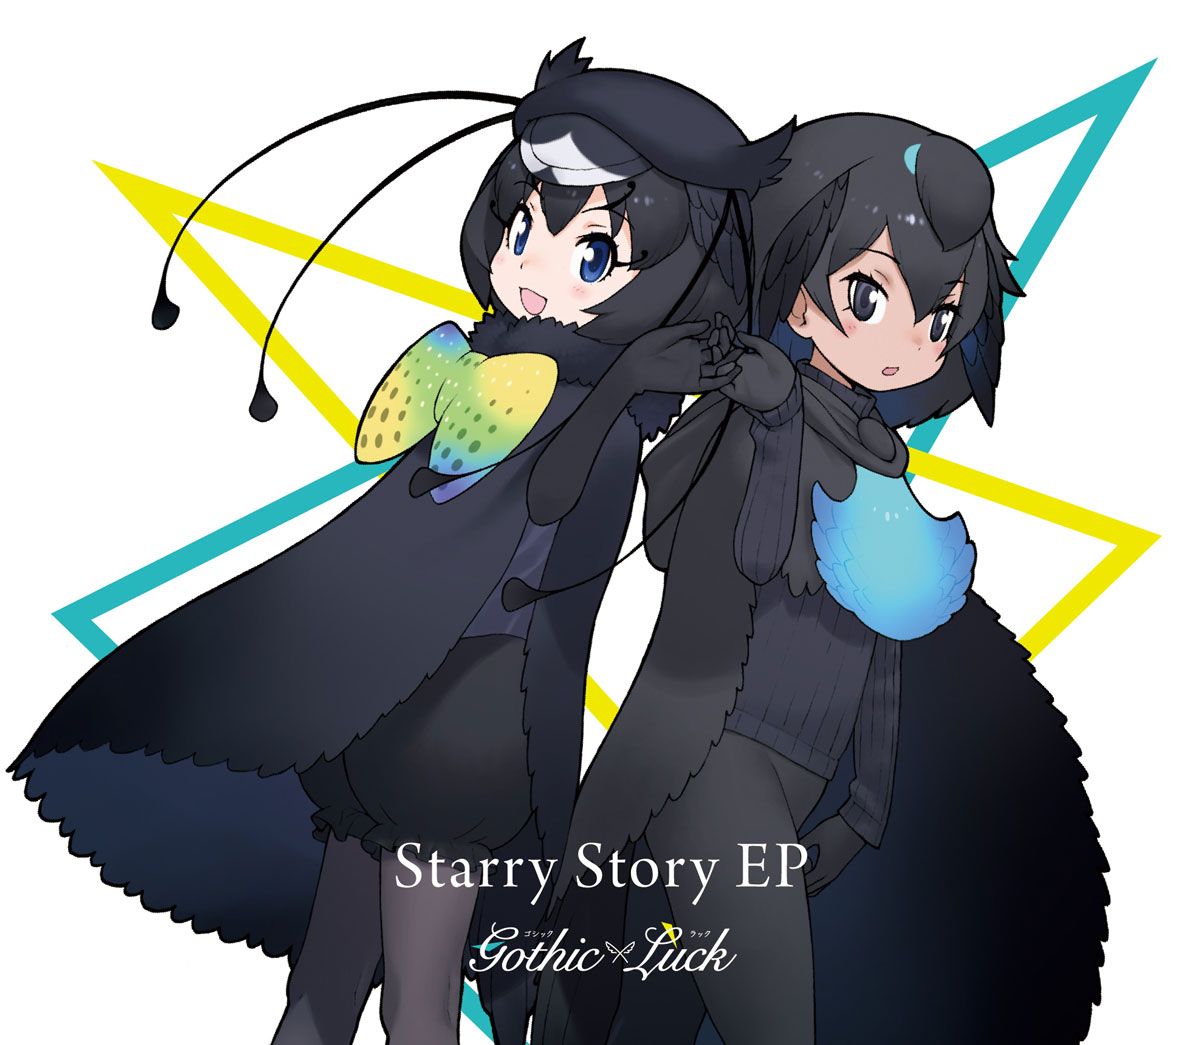 Starry Story EP (完全生産限定けものフレンズ盤)